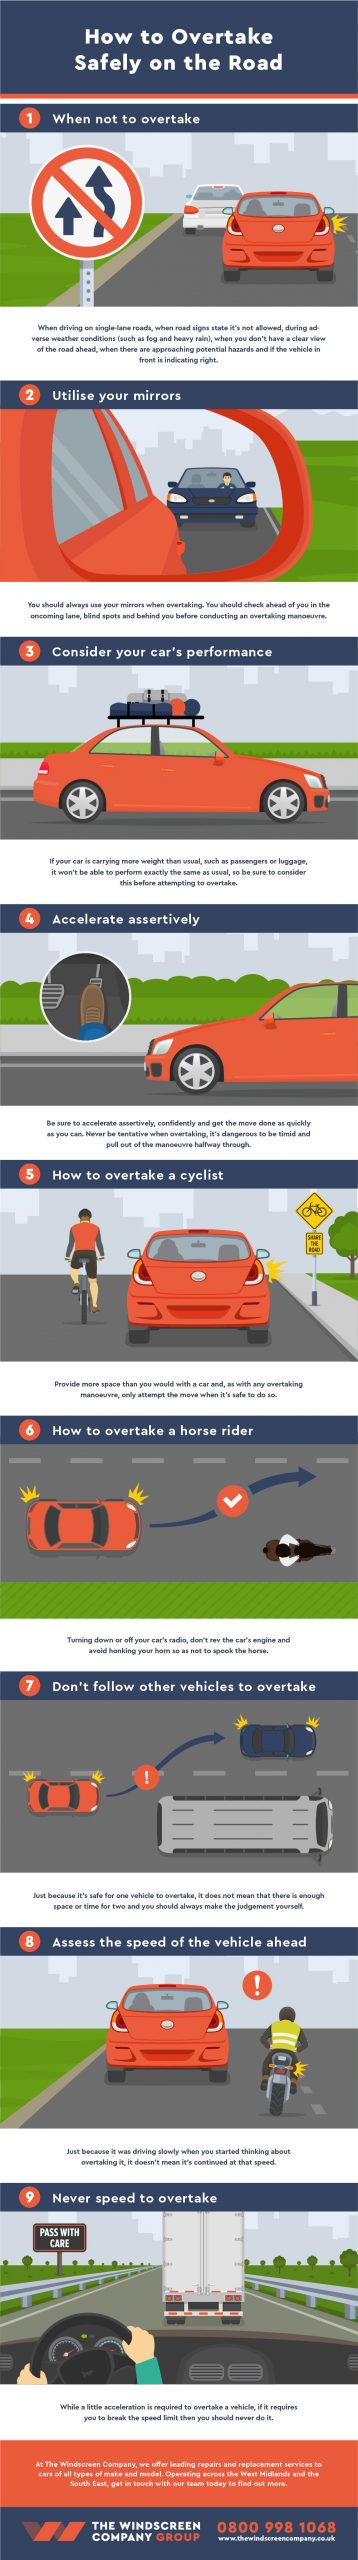 A guide to overtaking safely on the road (1)